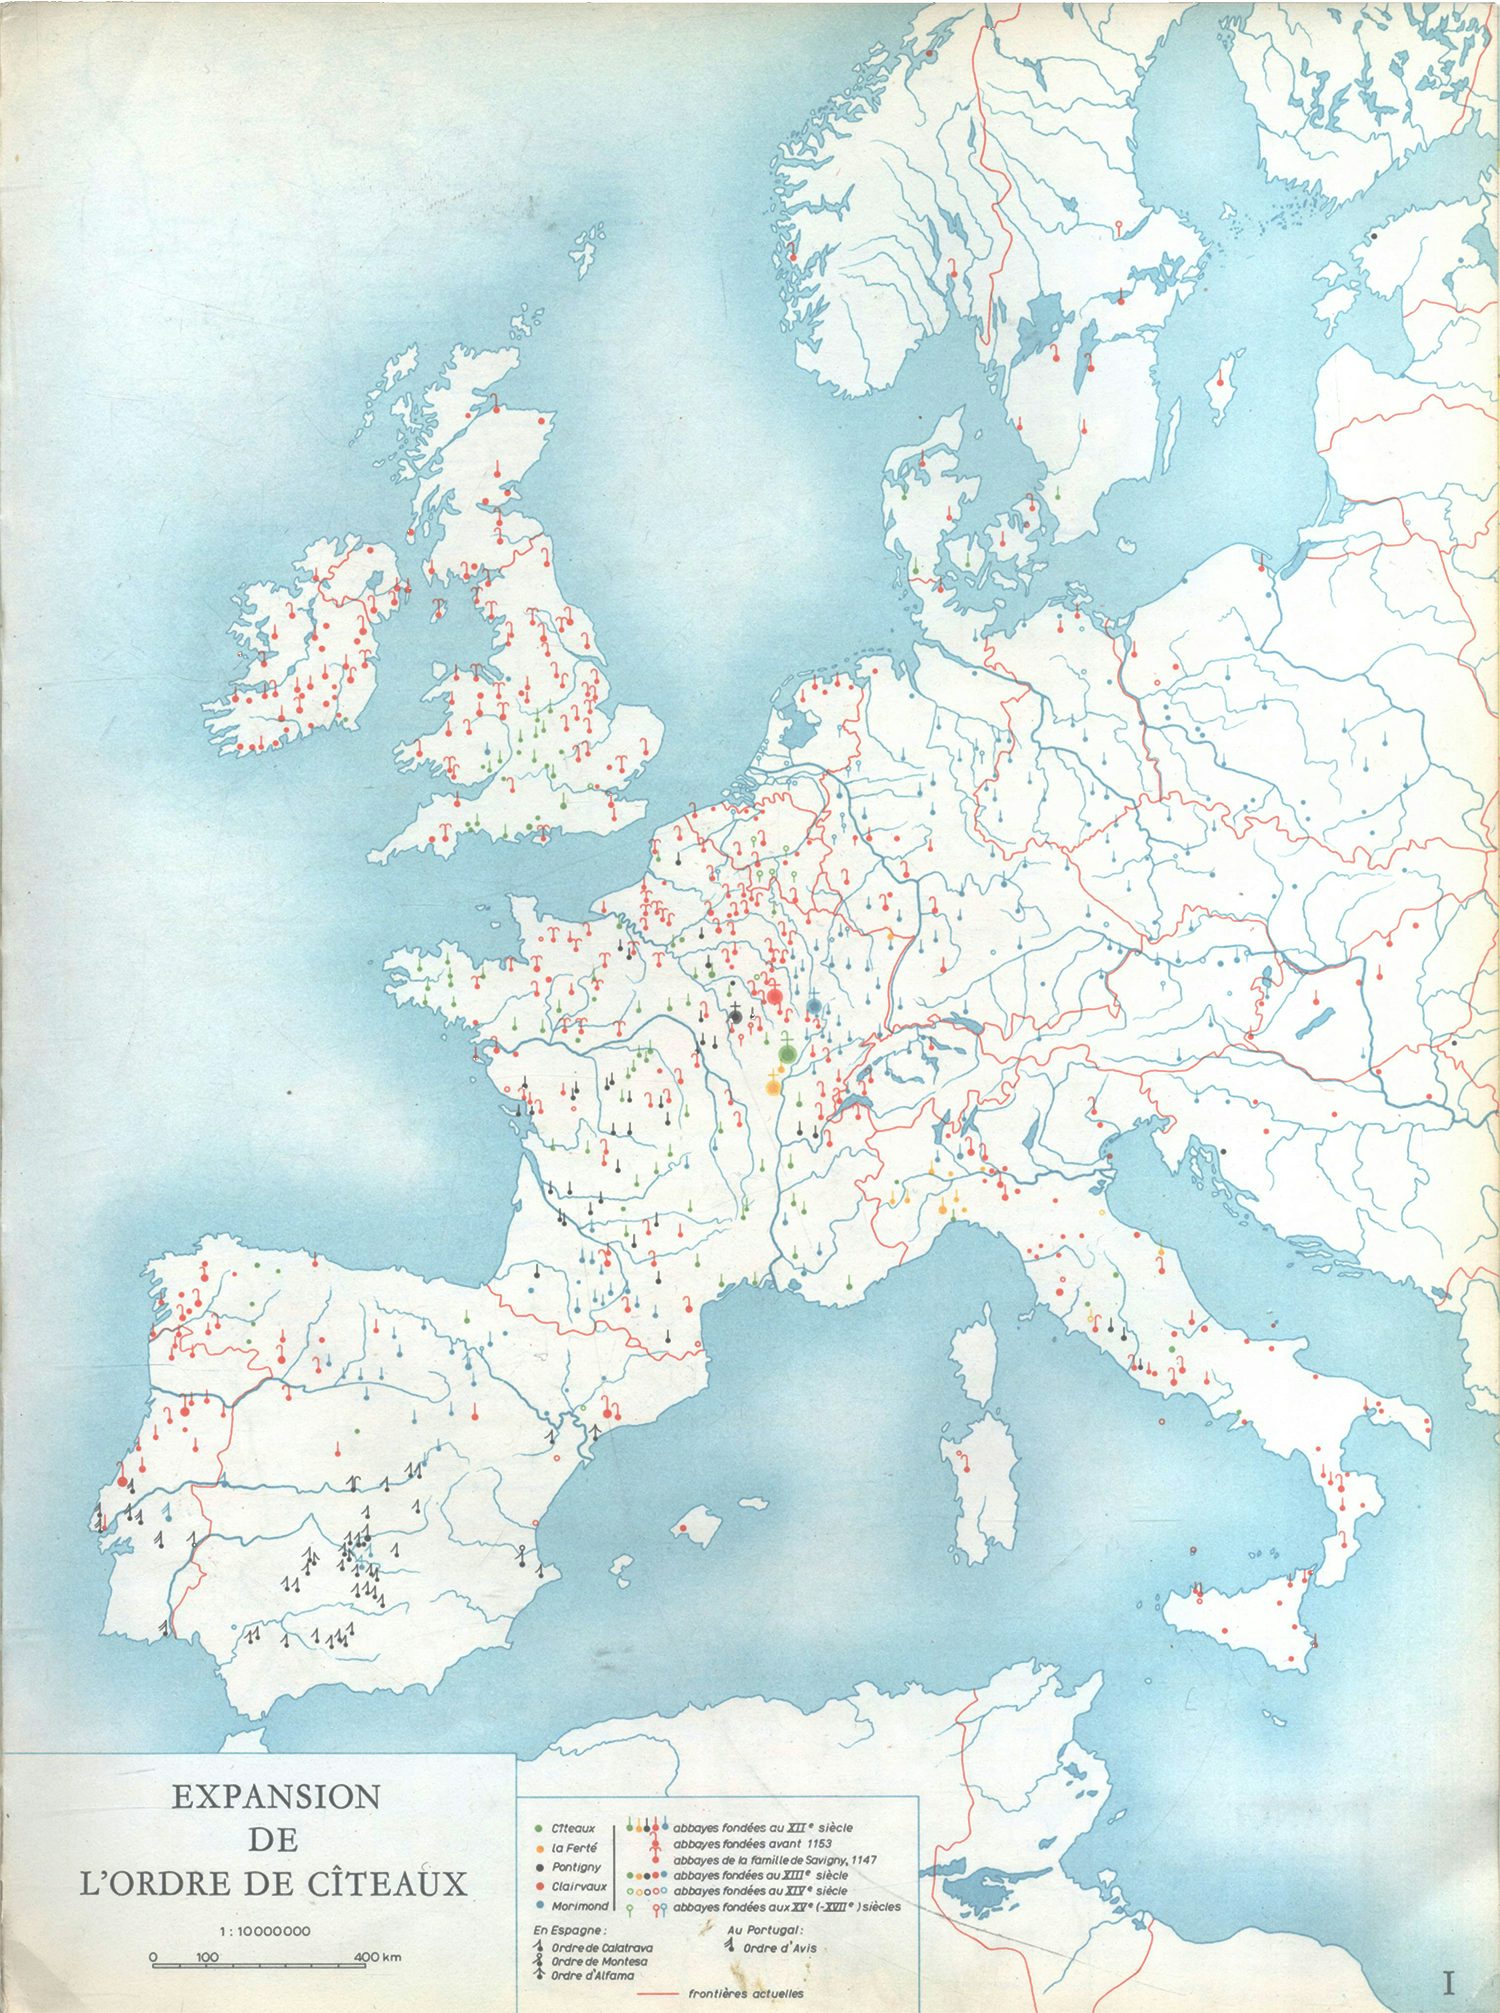 Expansion of Cistercian monasteries across Europe. The Cistercian order was able to establish a network of exclaves across the continent in a time of highly fragmented and fragile territorial governance. Through their network of semi-autonomous communities that observed strict traditions, they made major contributions to agriculture, technology, education and culture at large. Image: F.V.D. Meer